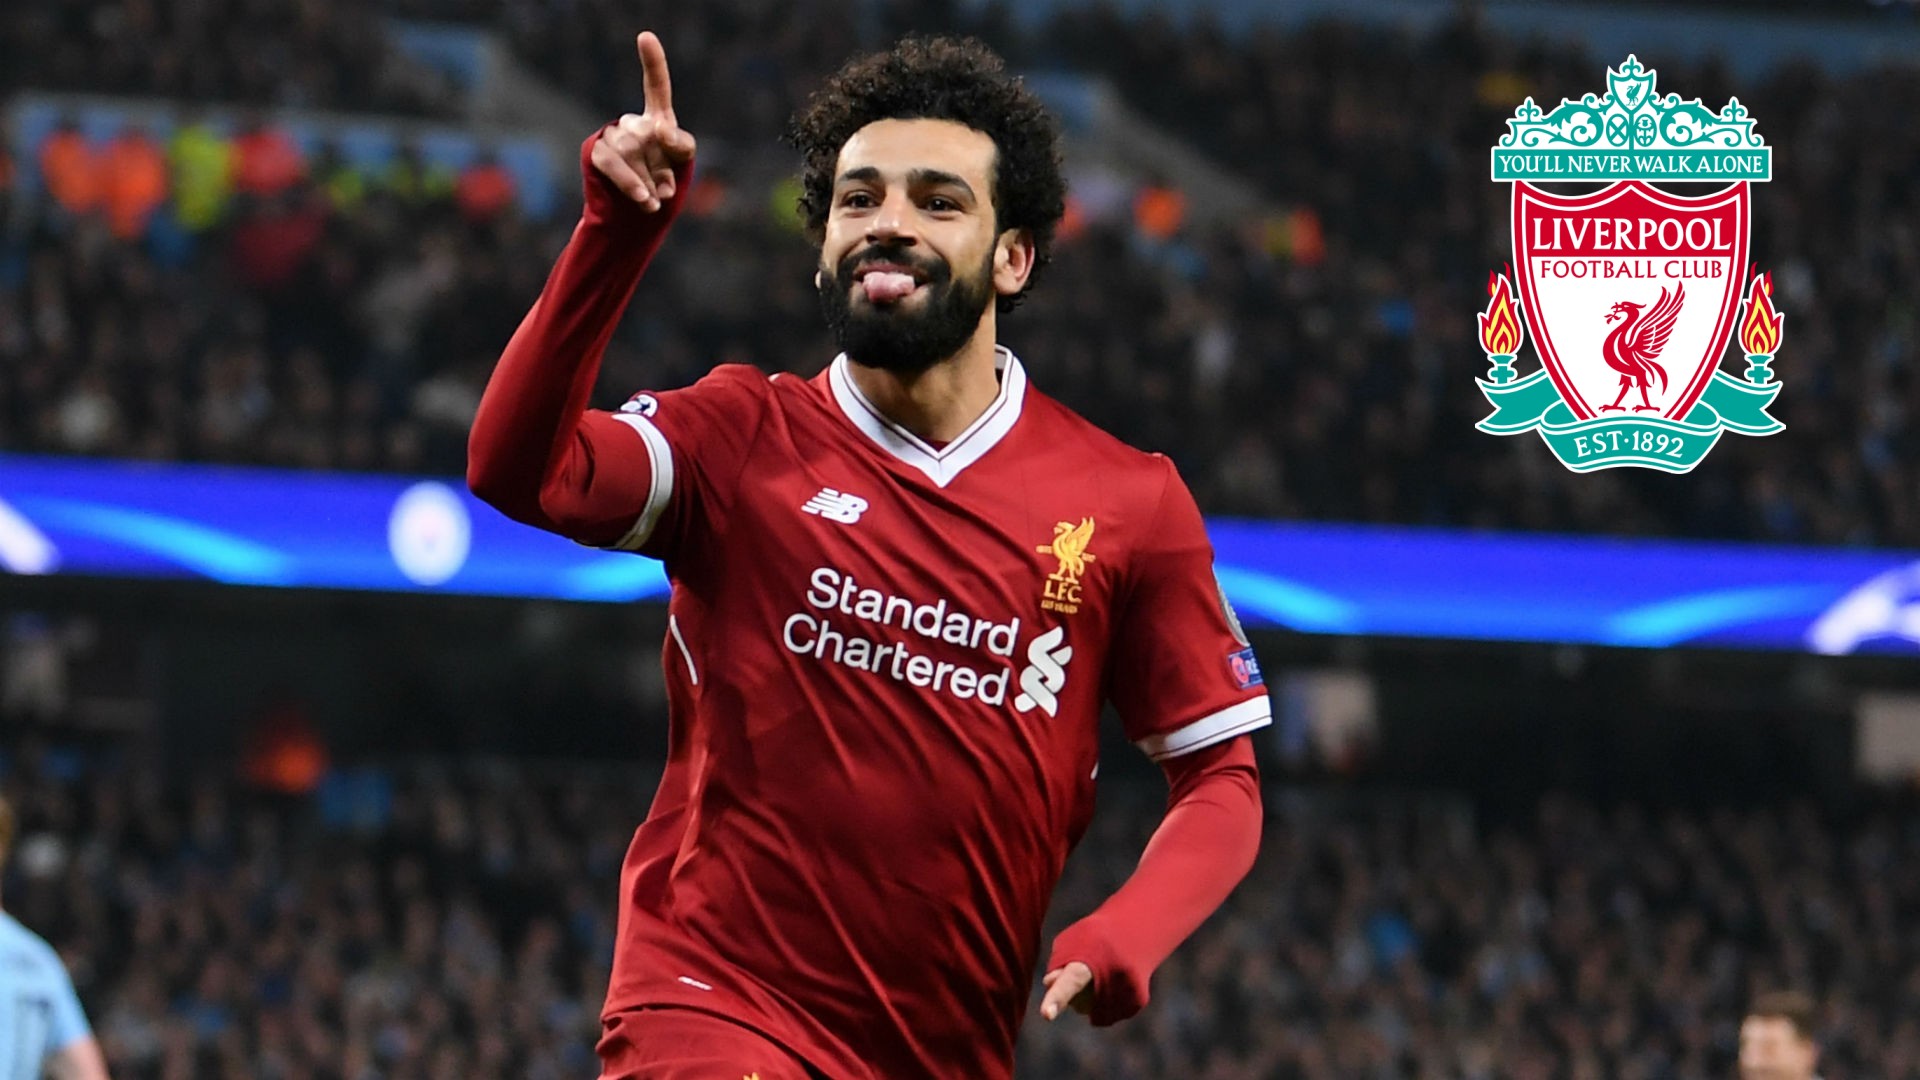 Liverpool Mohamed Salah Background Wallpaper HD With Resolution 1920X1080 pixel. You can make this wallpaper for your Desktop Computer Backgrounds, Mac Wallpapers, Android Lock screen or iPhone Screensavers